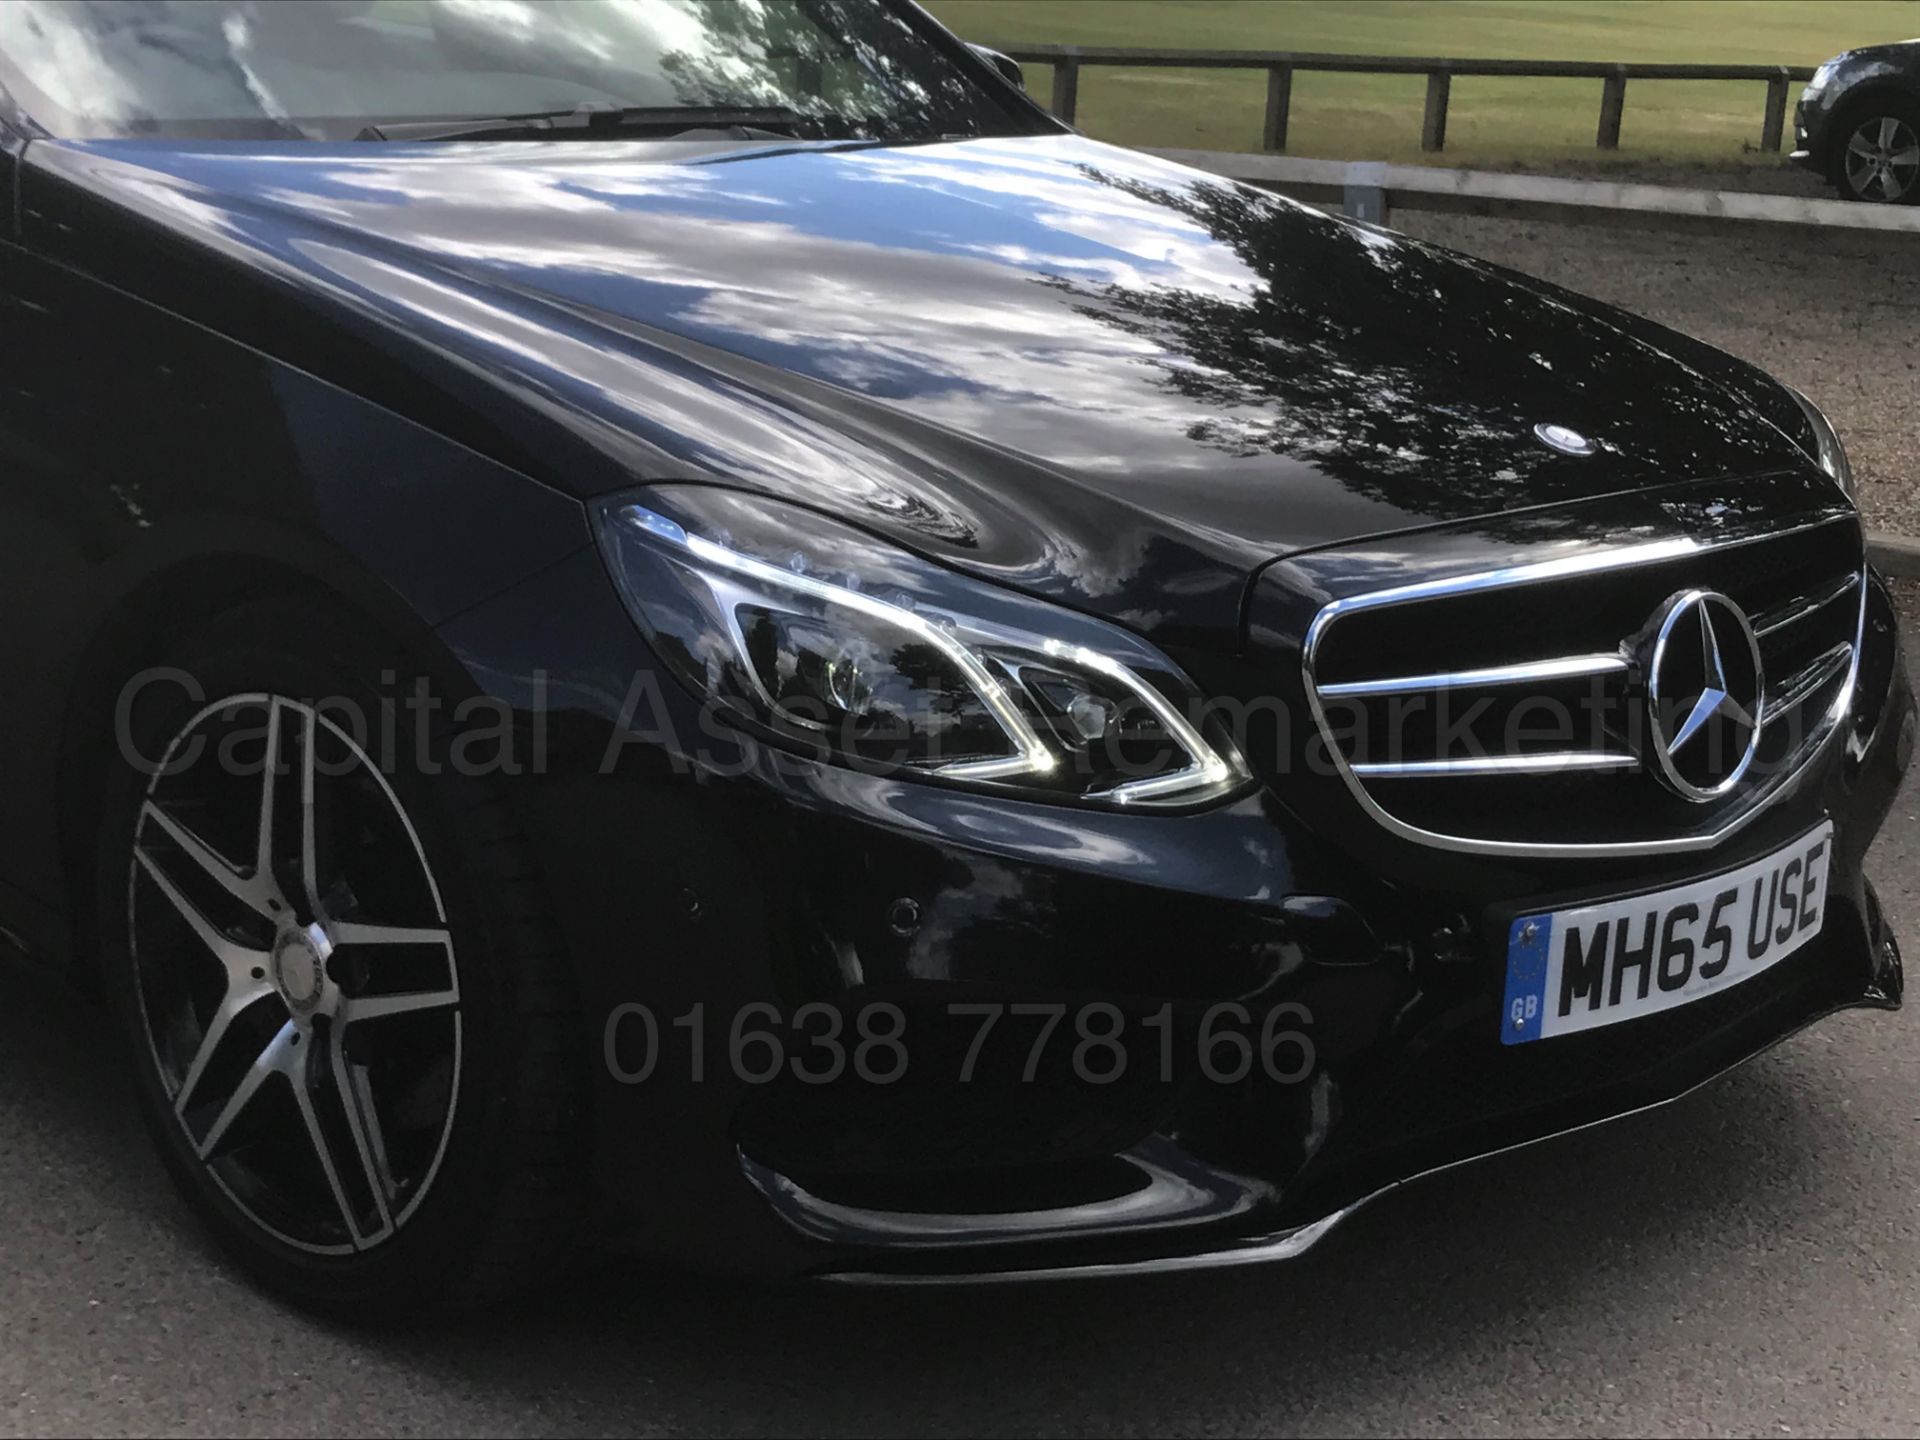 MERCEDES-BENZ E220D *AMG - NIGHT EDITION* SALOON (2016) '7G AUTO - LEATHER - SAT NAV' *LOW MILES* - Image 13 of 43